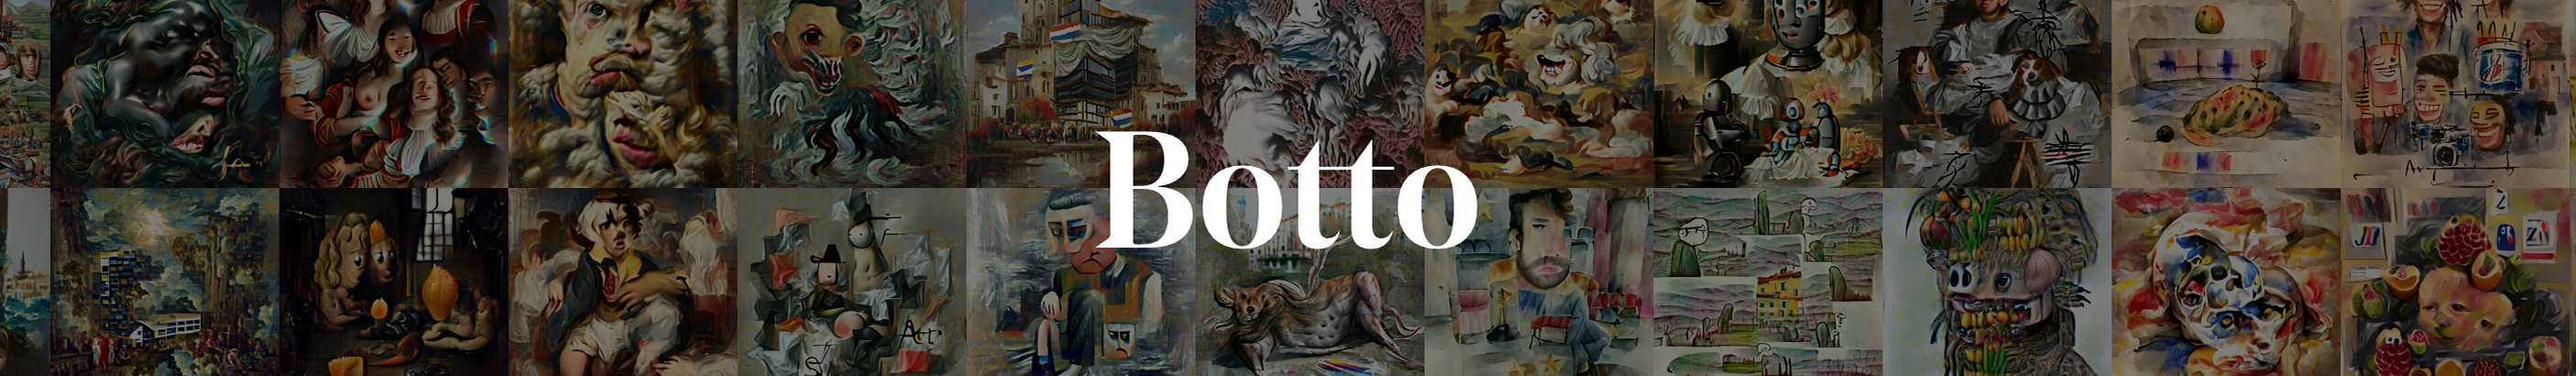 Botto Project's profile banner